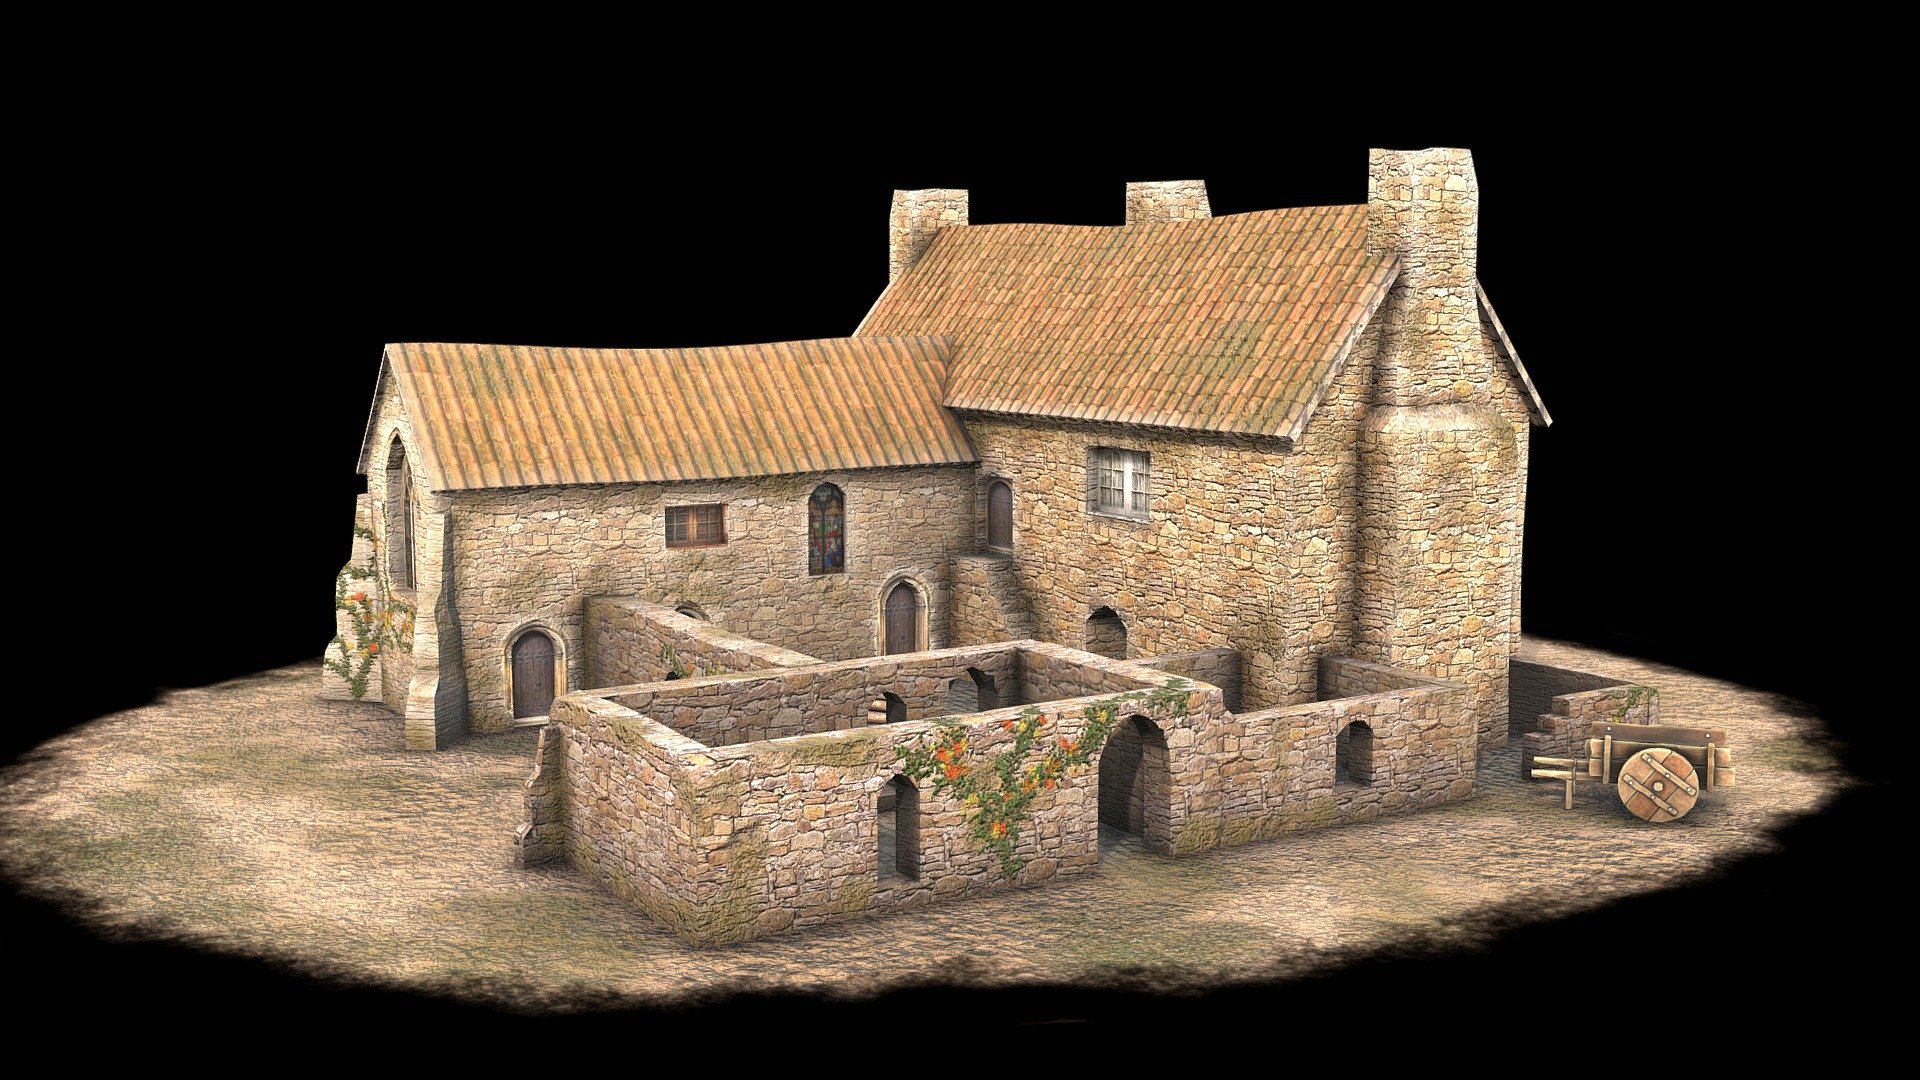 This low-poly model is based on a Knights Hospitaller Preceptory and Dower House at Low Chibburn, Widdrington, Northumberland, in the UK.  Whilst not an exact scale model, it does follow the floor plan of the Preceptory and associated buildings dating back to the early 14th Century.  For more information on Low Chibburn Preceptory click this link https://www.fusilier.co.uk/widdrington_northumberland/low_chibburn_preceptory_dower_house.htm

The inspiration for this model is the latest episode of Time Team exploring a Knights Hospitaller Preceptory site on the Welsh border - click this link for episode 1 https://youtu.be/obymynsh-Ew

Click on the numbered annotations on the model to see the function of each building.

I have kept the poly count as low as possible and the model should work well in a game engine such as Unreal 3d model